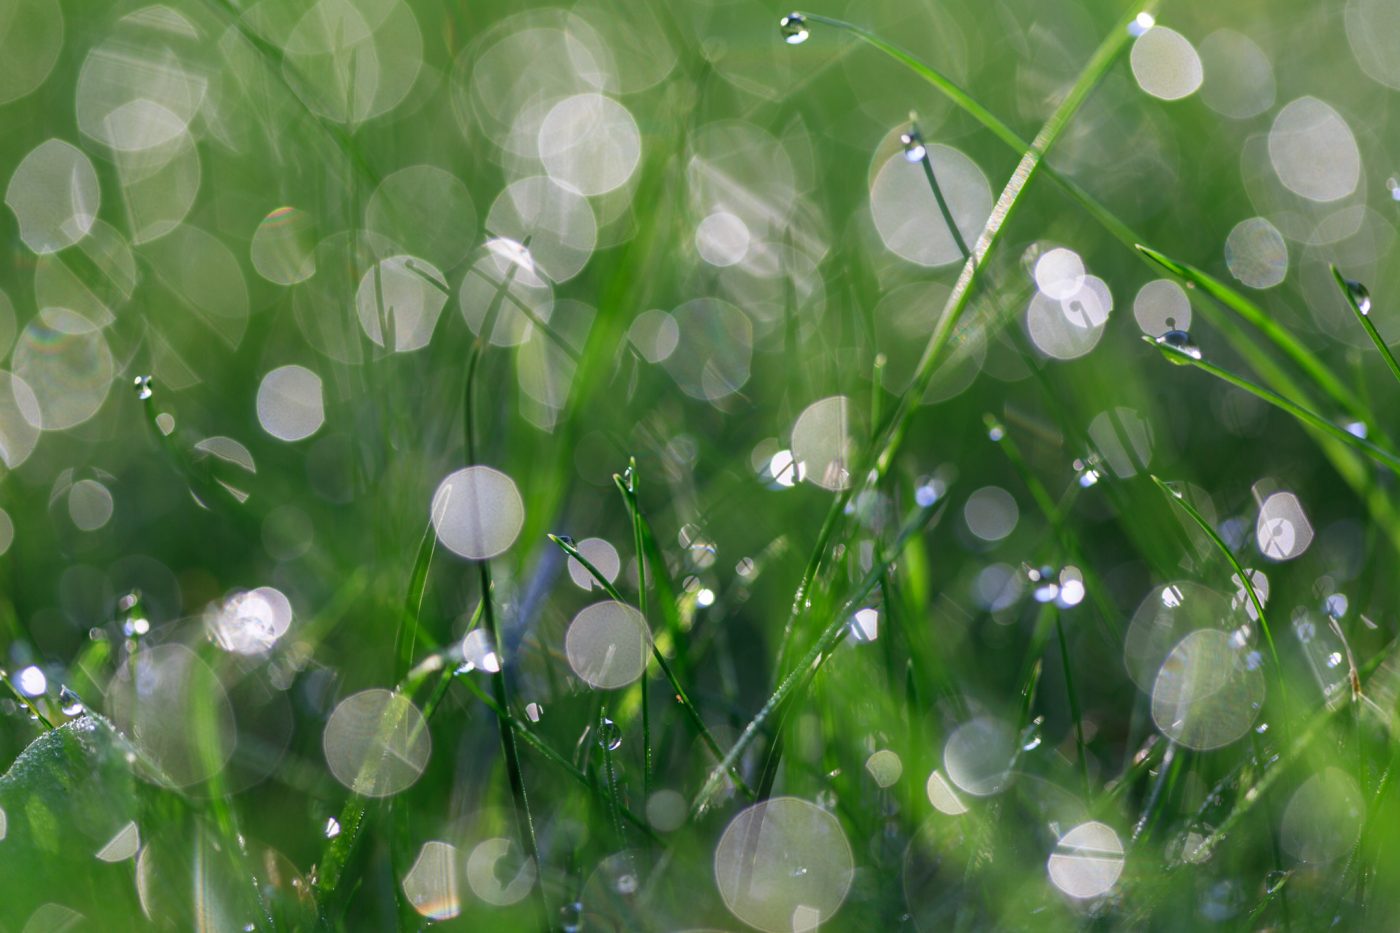 Photo: Dew in the lawn